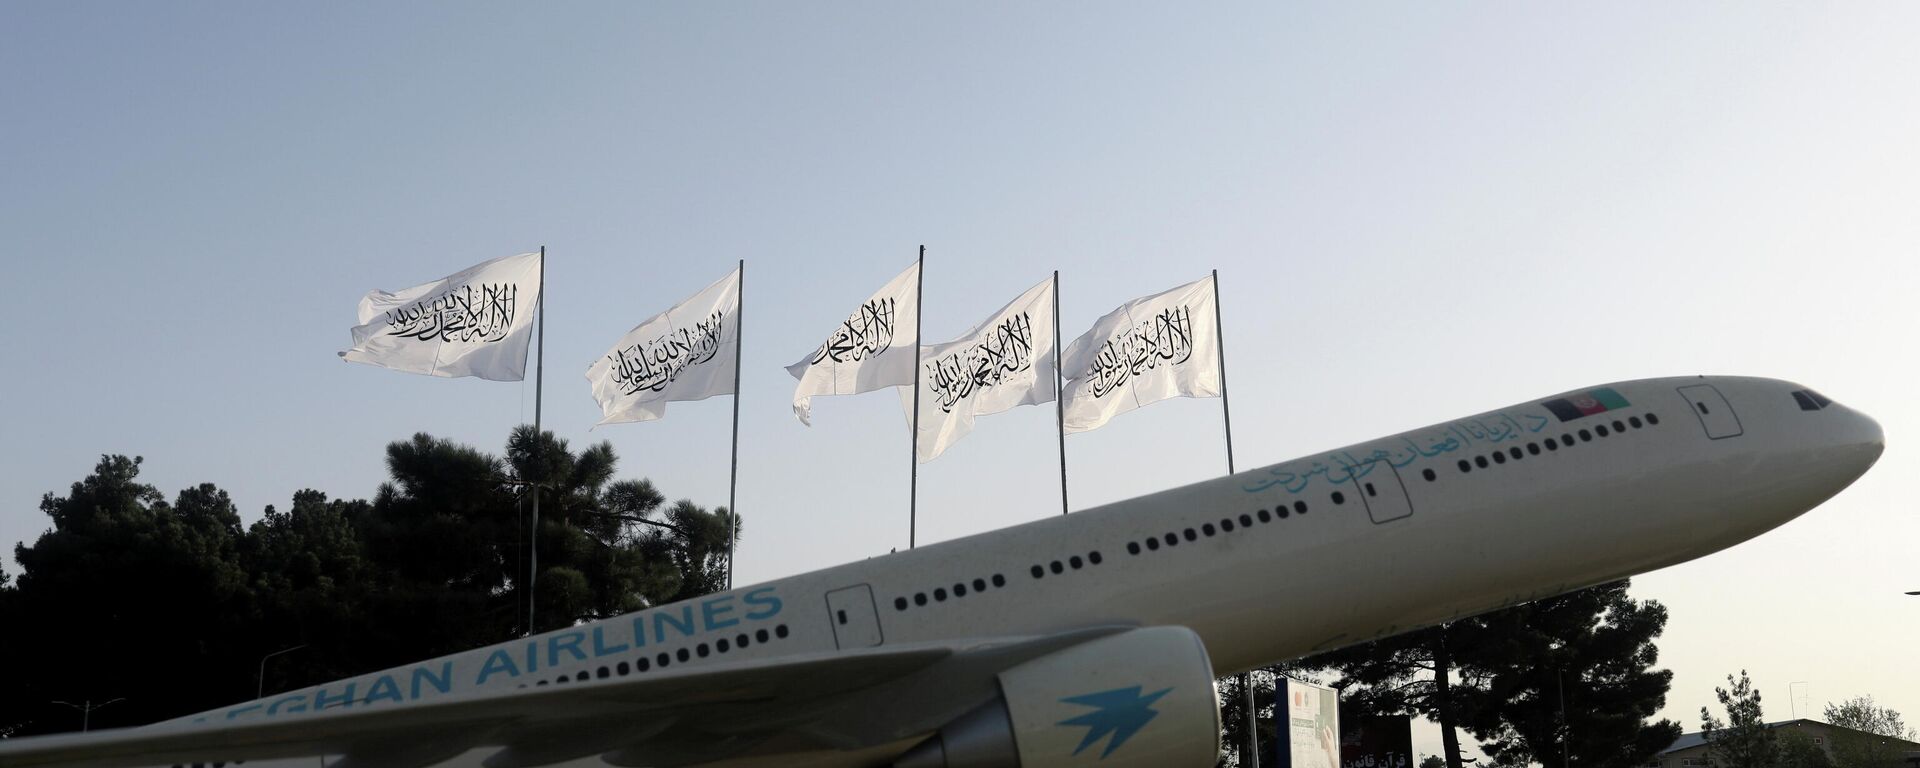 A view shows flags of the Islamic Emirate of Afghanistan at the international airport in Kabul, Afghanistan, September 9, 2021. - Sputnik International, 1920, 29.09.2021